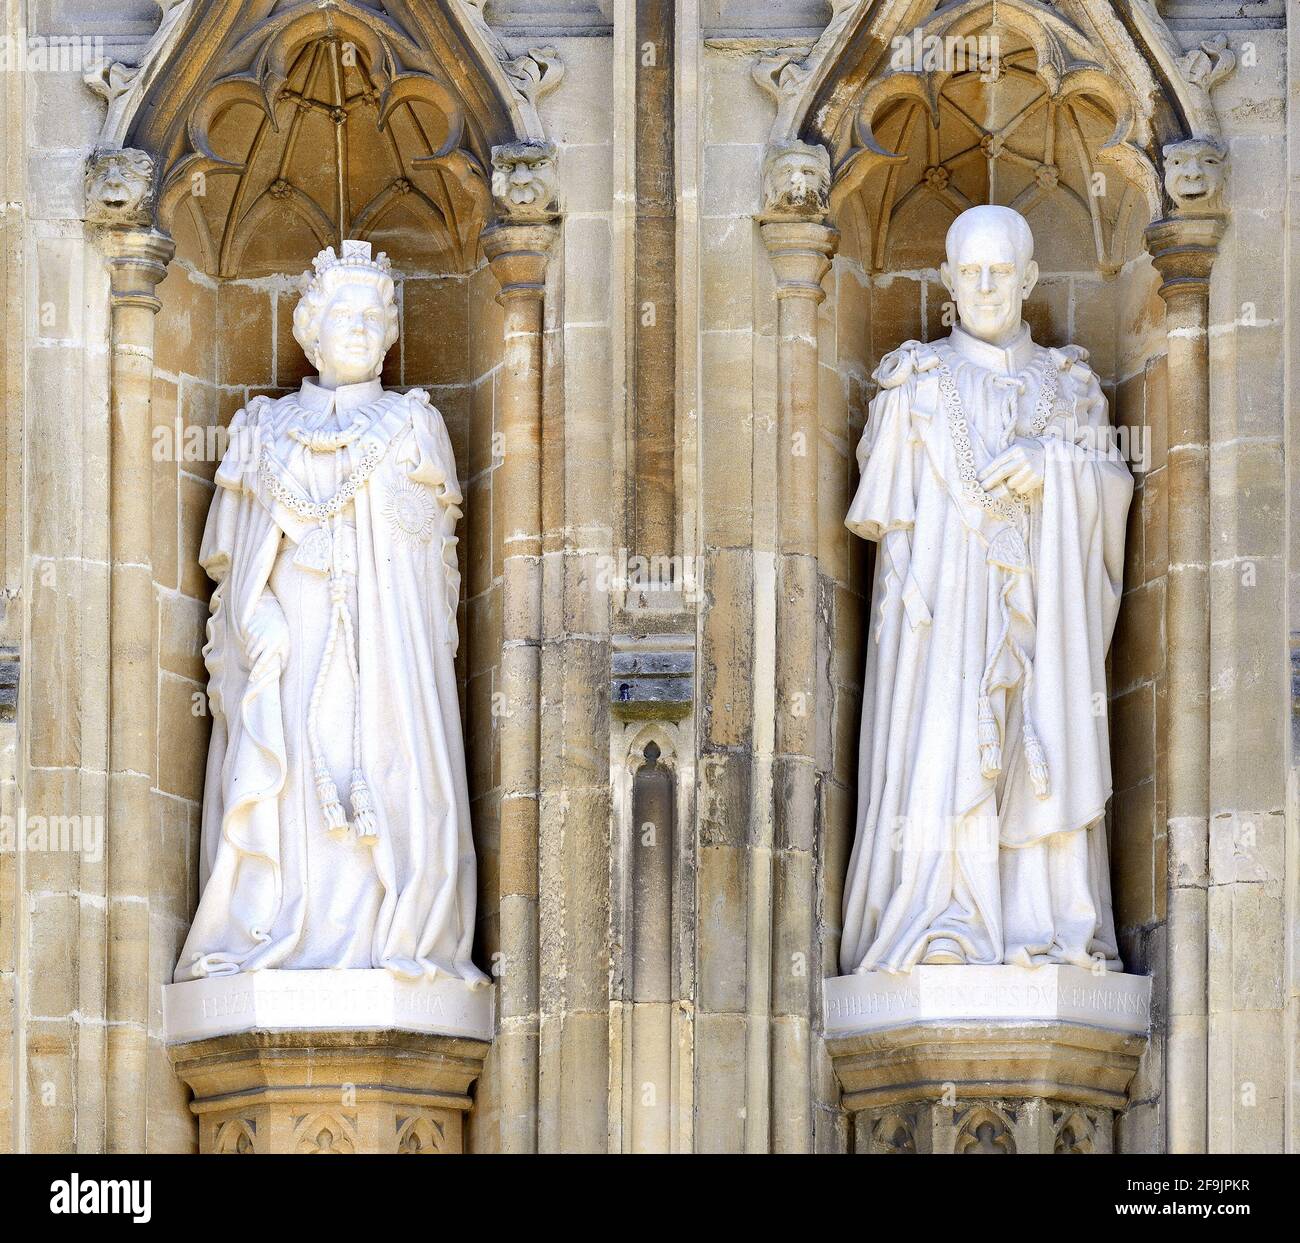 Canterbury, Kent, UK. Canterbury Cathedral: statues of Queen Elizabeth II and Prince Philip, Duke of Edinburgh (by Nina Bilby) unveiled by the Queen i Stock Photo